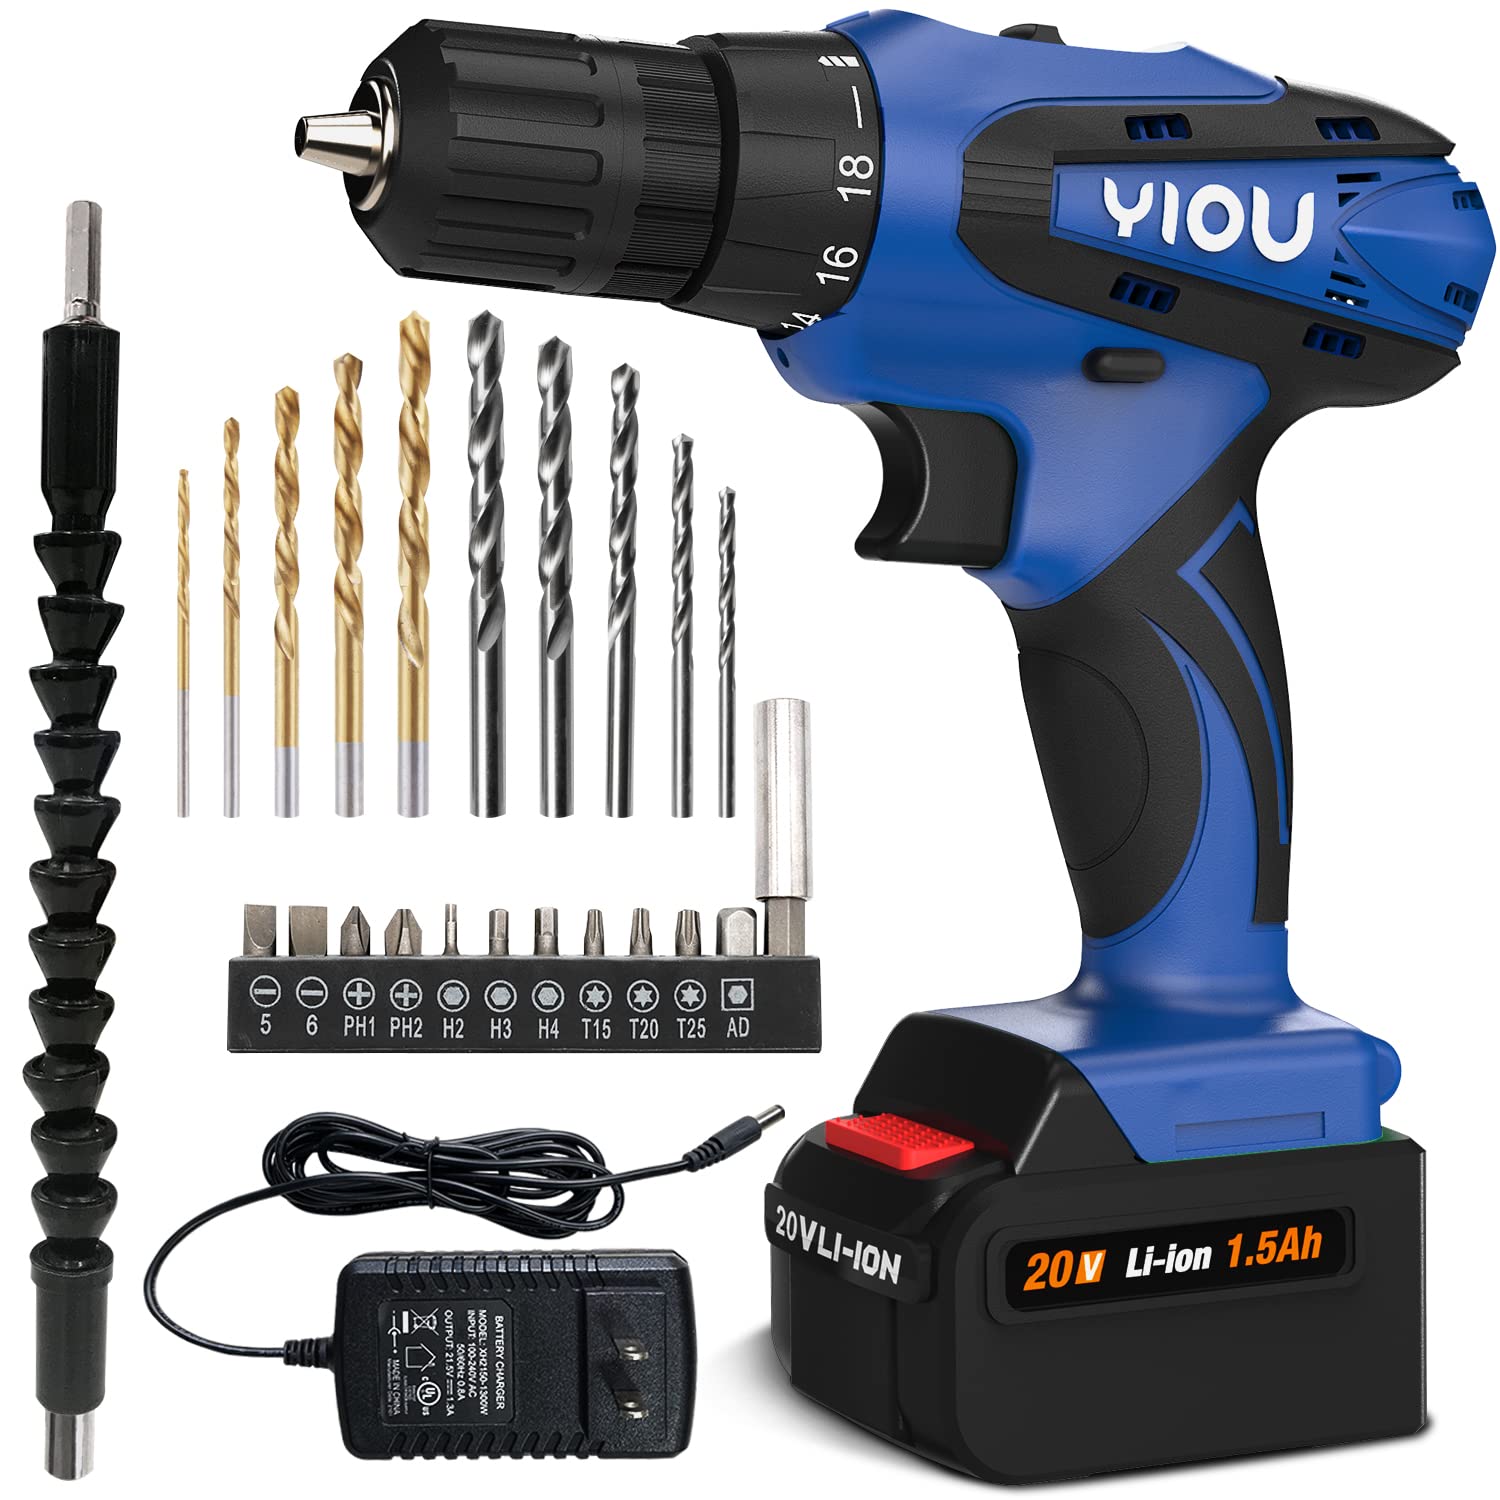 YIOU 20V MAX Cordless Drill, 18 Position Clutch Drill with 23PCS Drill Set, 3/8 Inches Keyless Chuck Power Drill and Battery Charger, Blue Driller Set